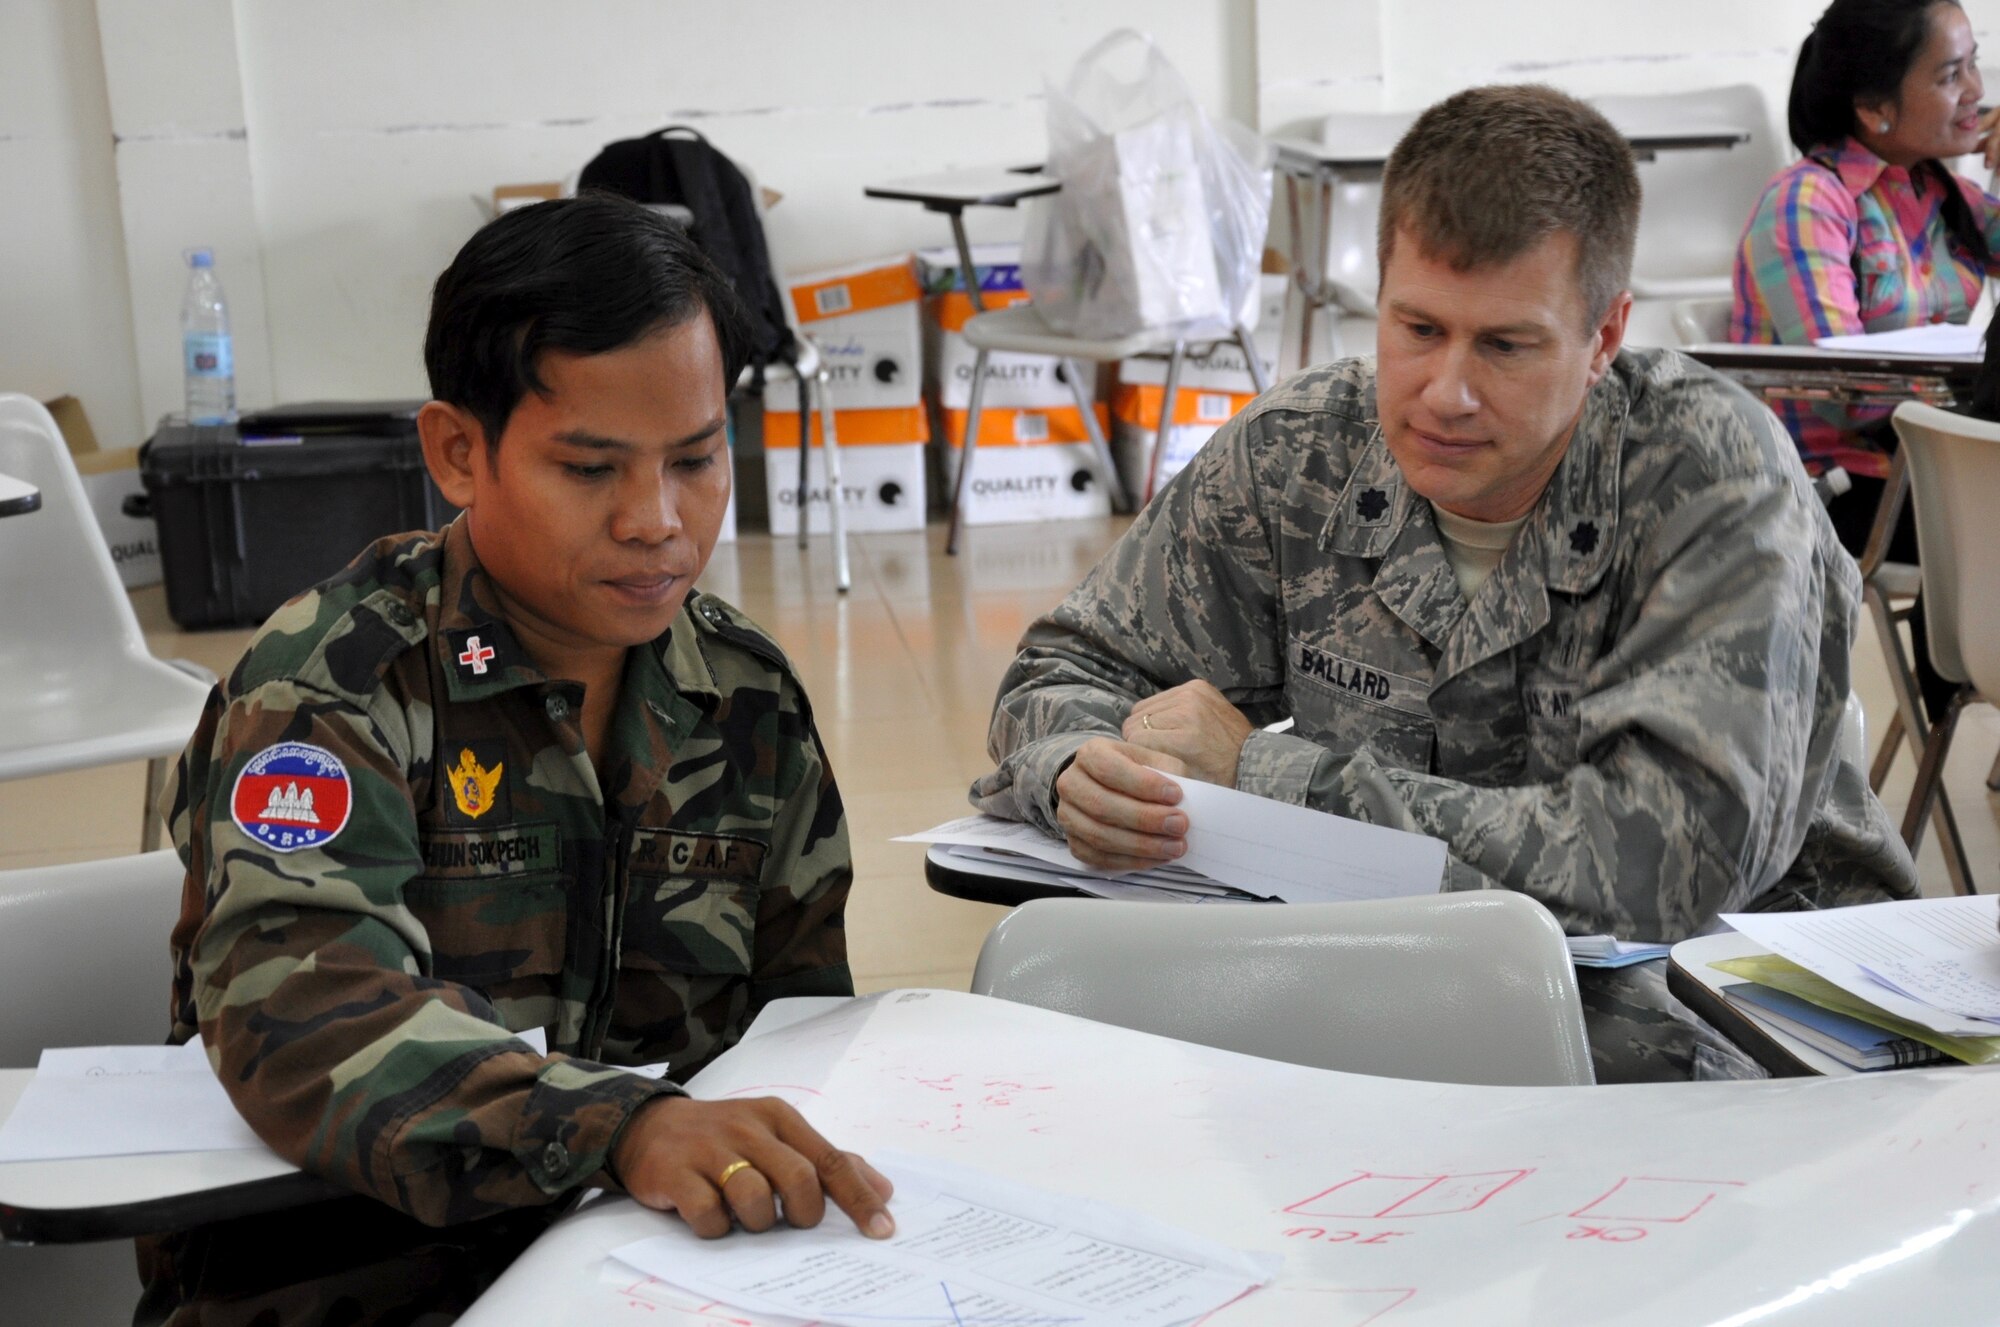 U.S. Air Force Lt. Col. Timothy Ballard listens as Royal Cambodian Armed Forces Khun Sokpech describes his plan for patient care and treatment during a natural disaster response scenario June 9, 2016 in Kampot Province, Cambodia. The scenario was part of a subject matter expert exchange focused on humanitarian assistance and disaster response held during Pacific Angel 16-2, a total force, joint and combined humanitarian assistance mission led by the U.S. Air Force. Events such as this aid in the Cambodian Armed Forces and the provincial hospital and health clinic staff in being better-prepared and able to care for citizens as well be as ready to overcome a natural disaster. Ballard is a U.S. Air Force Preventive Medicine Physician deployed from the U.S. Air Force Medical Support Agency / Defense Institute for Medical Operations at Lackland Air Force Base, Texas. (U.S. Air Force photo by Capt. Susan Harrington)  